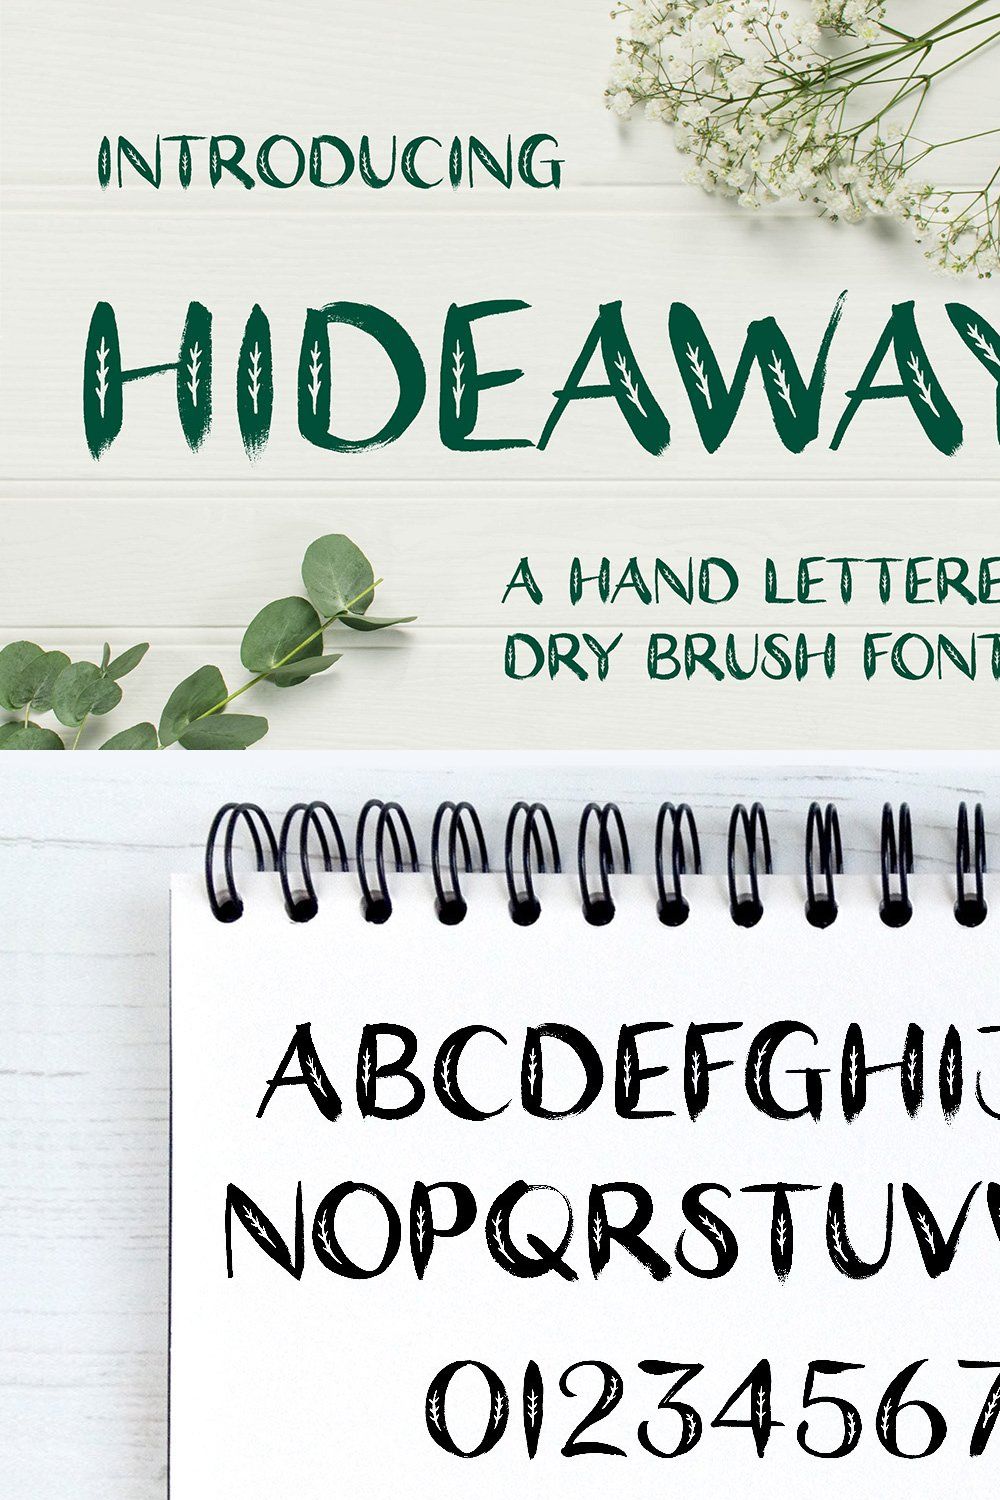 Hideaway Dry Brush Font pinterest preview image.